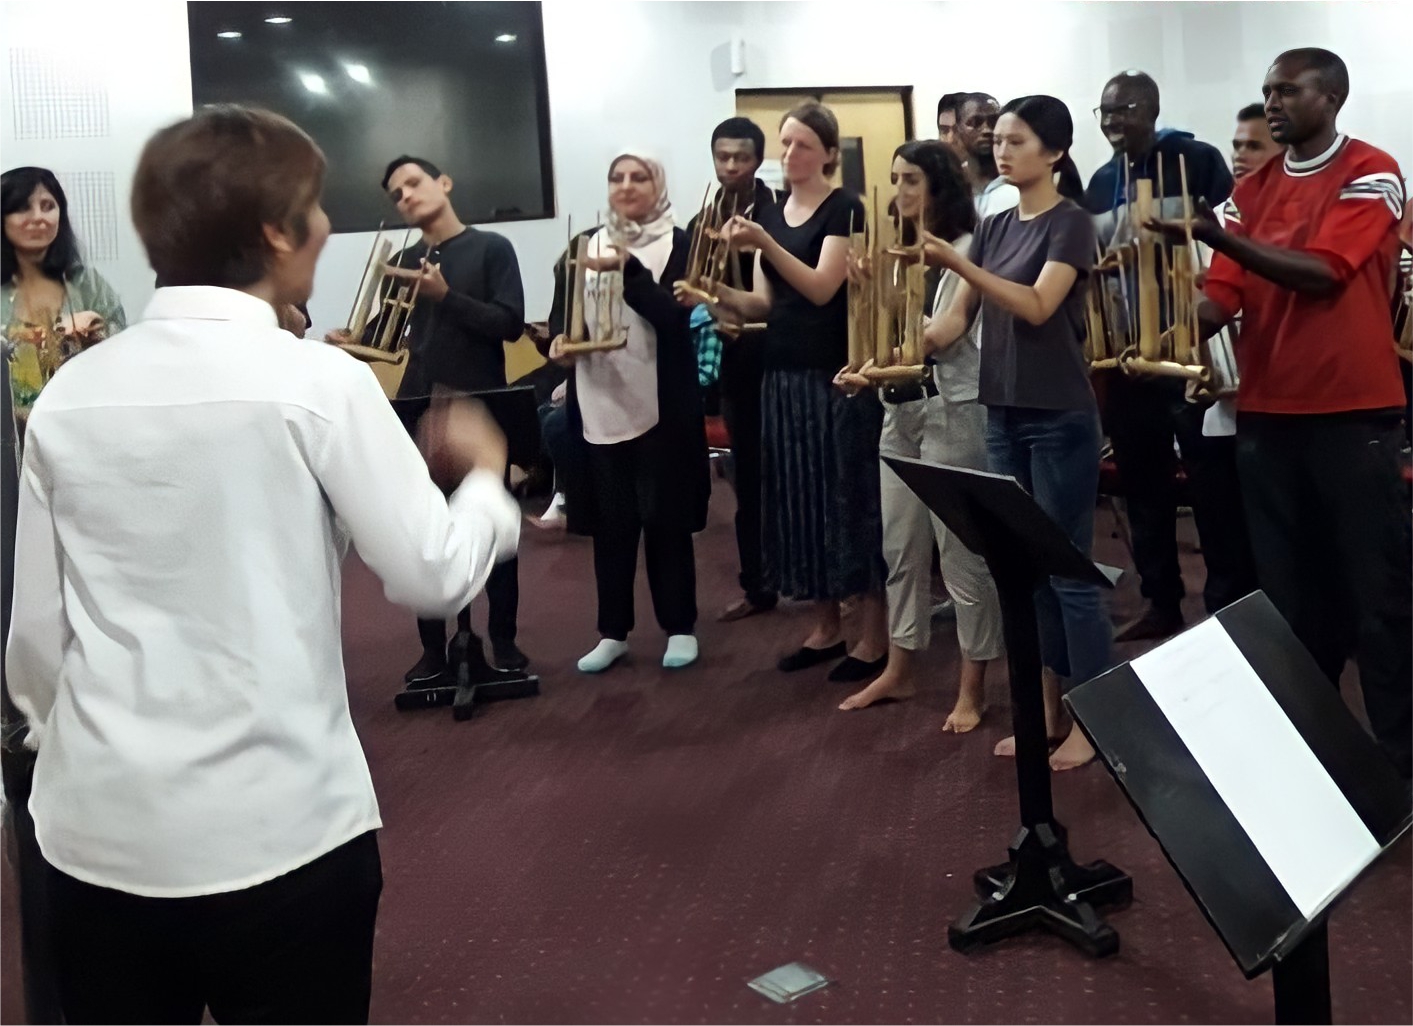 International students of Yogyakarta State University learn to play angklung which is one of the cultures in Indonesia